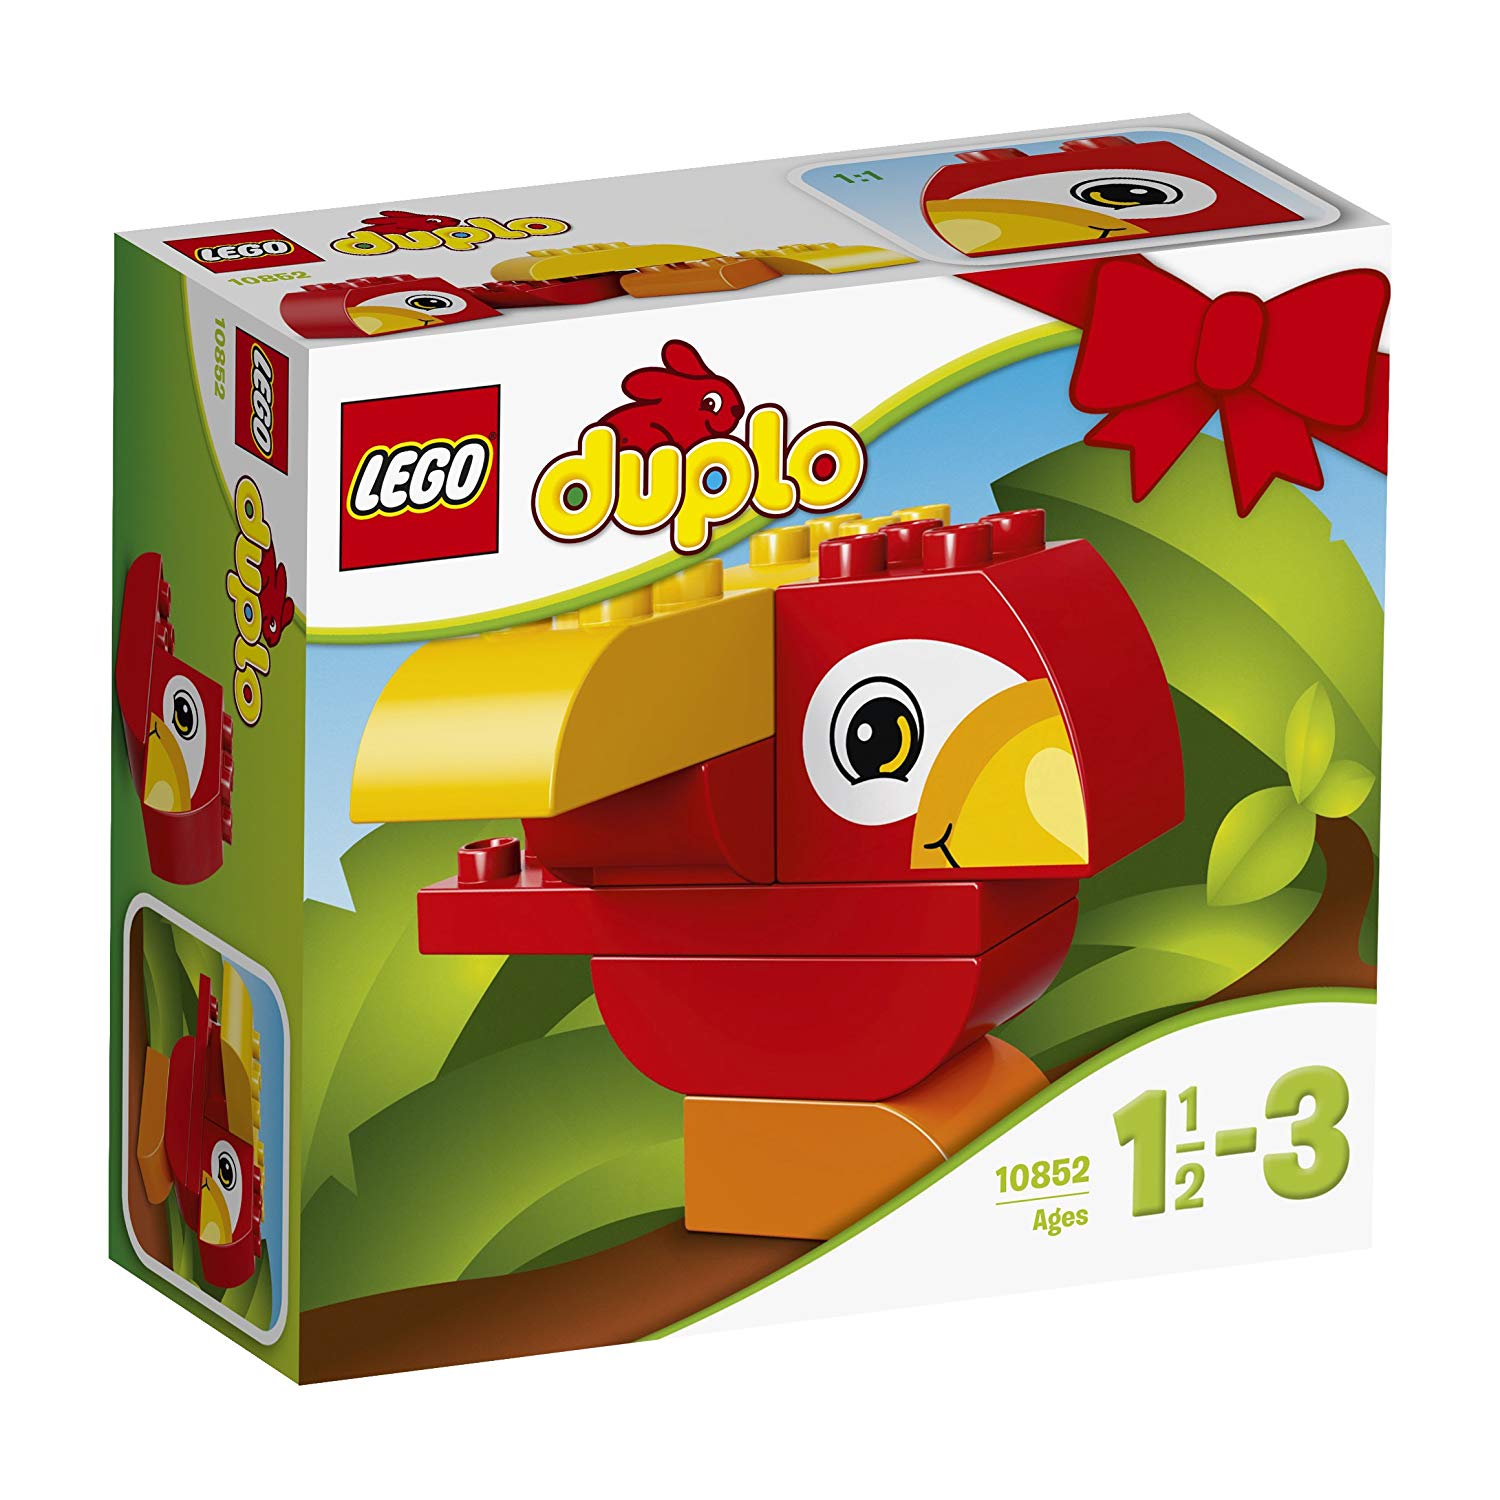 Lego Duplo My First Parrot